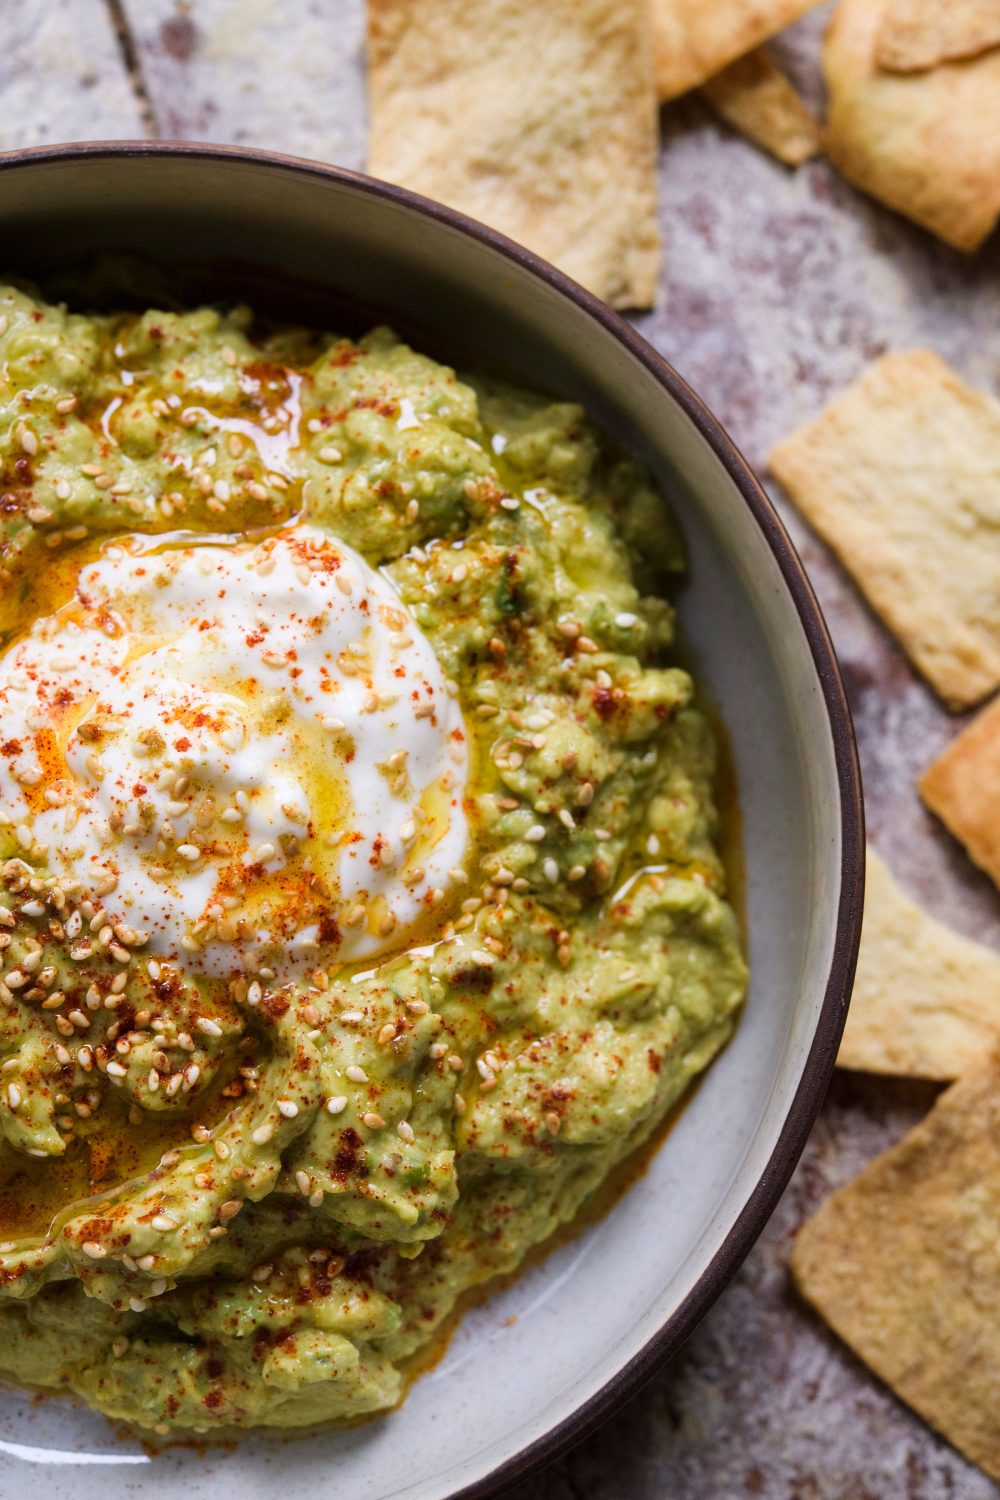 Mashed Avocados with Sesame and Chili